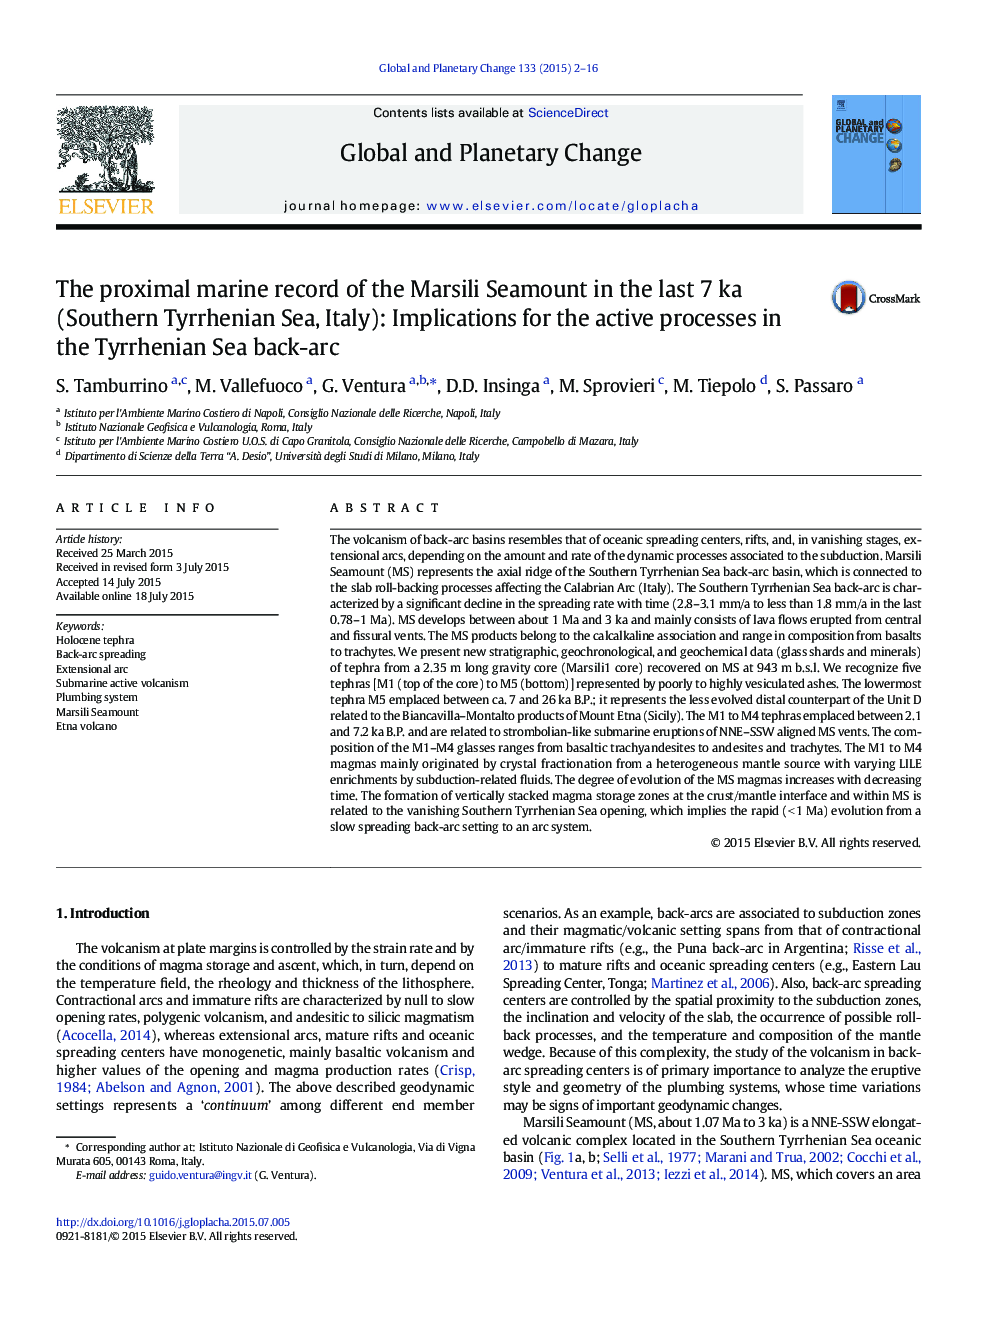 The proximal marine record of the Marsili Seamount in the last 7Â ka (Southern Tyrrhenian Sea, Italy): Implications for the active processes in the Tyrrhenian Sea back-arc